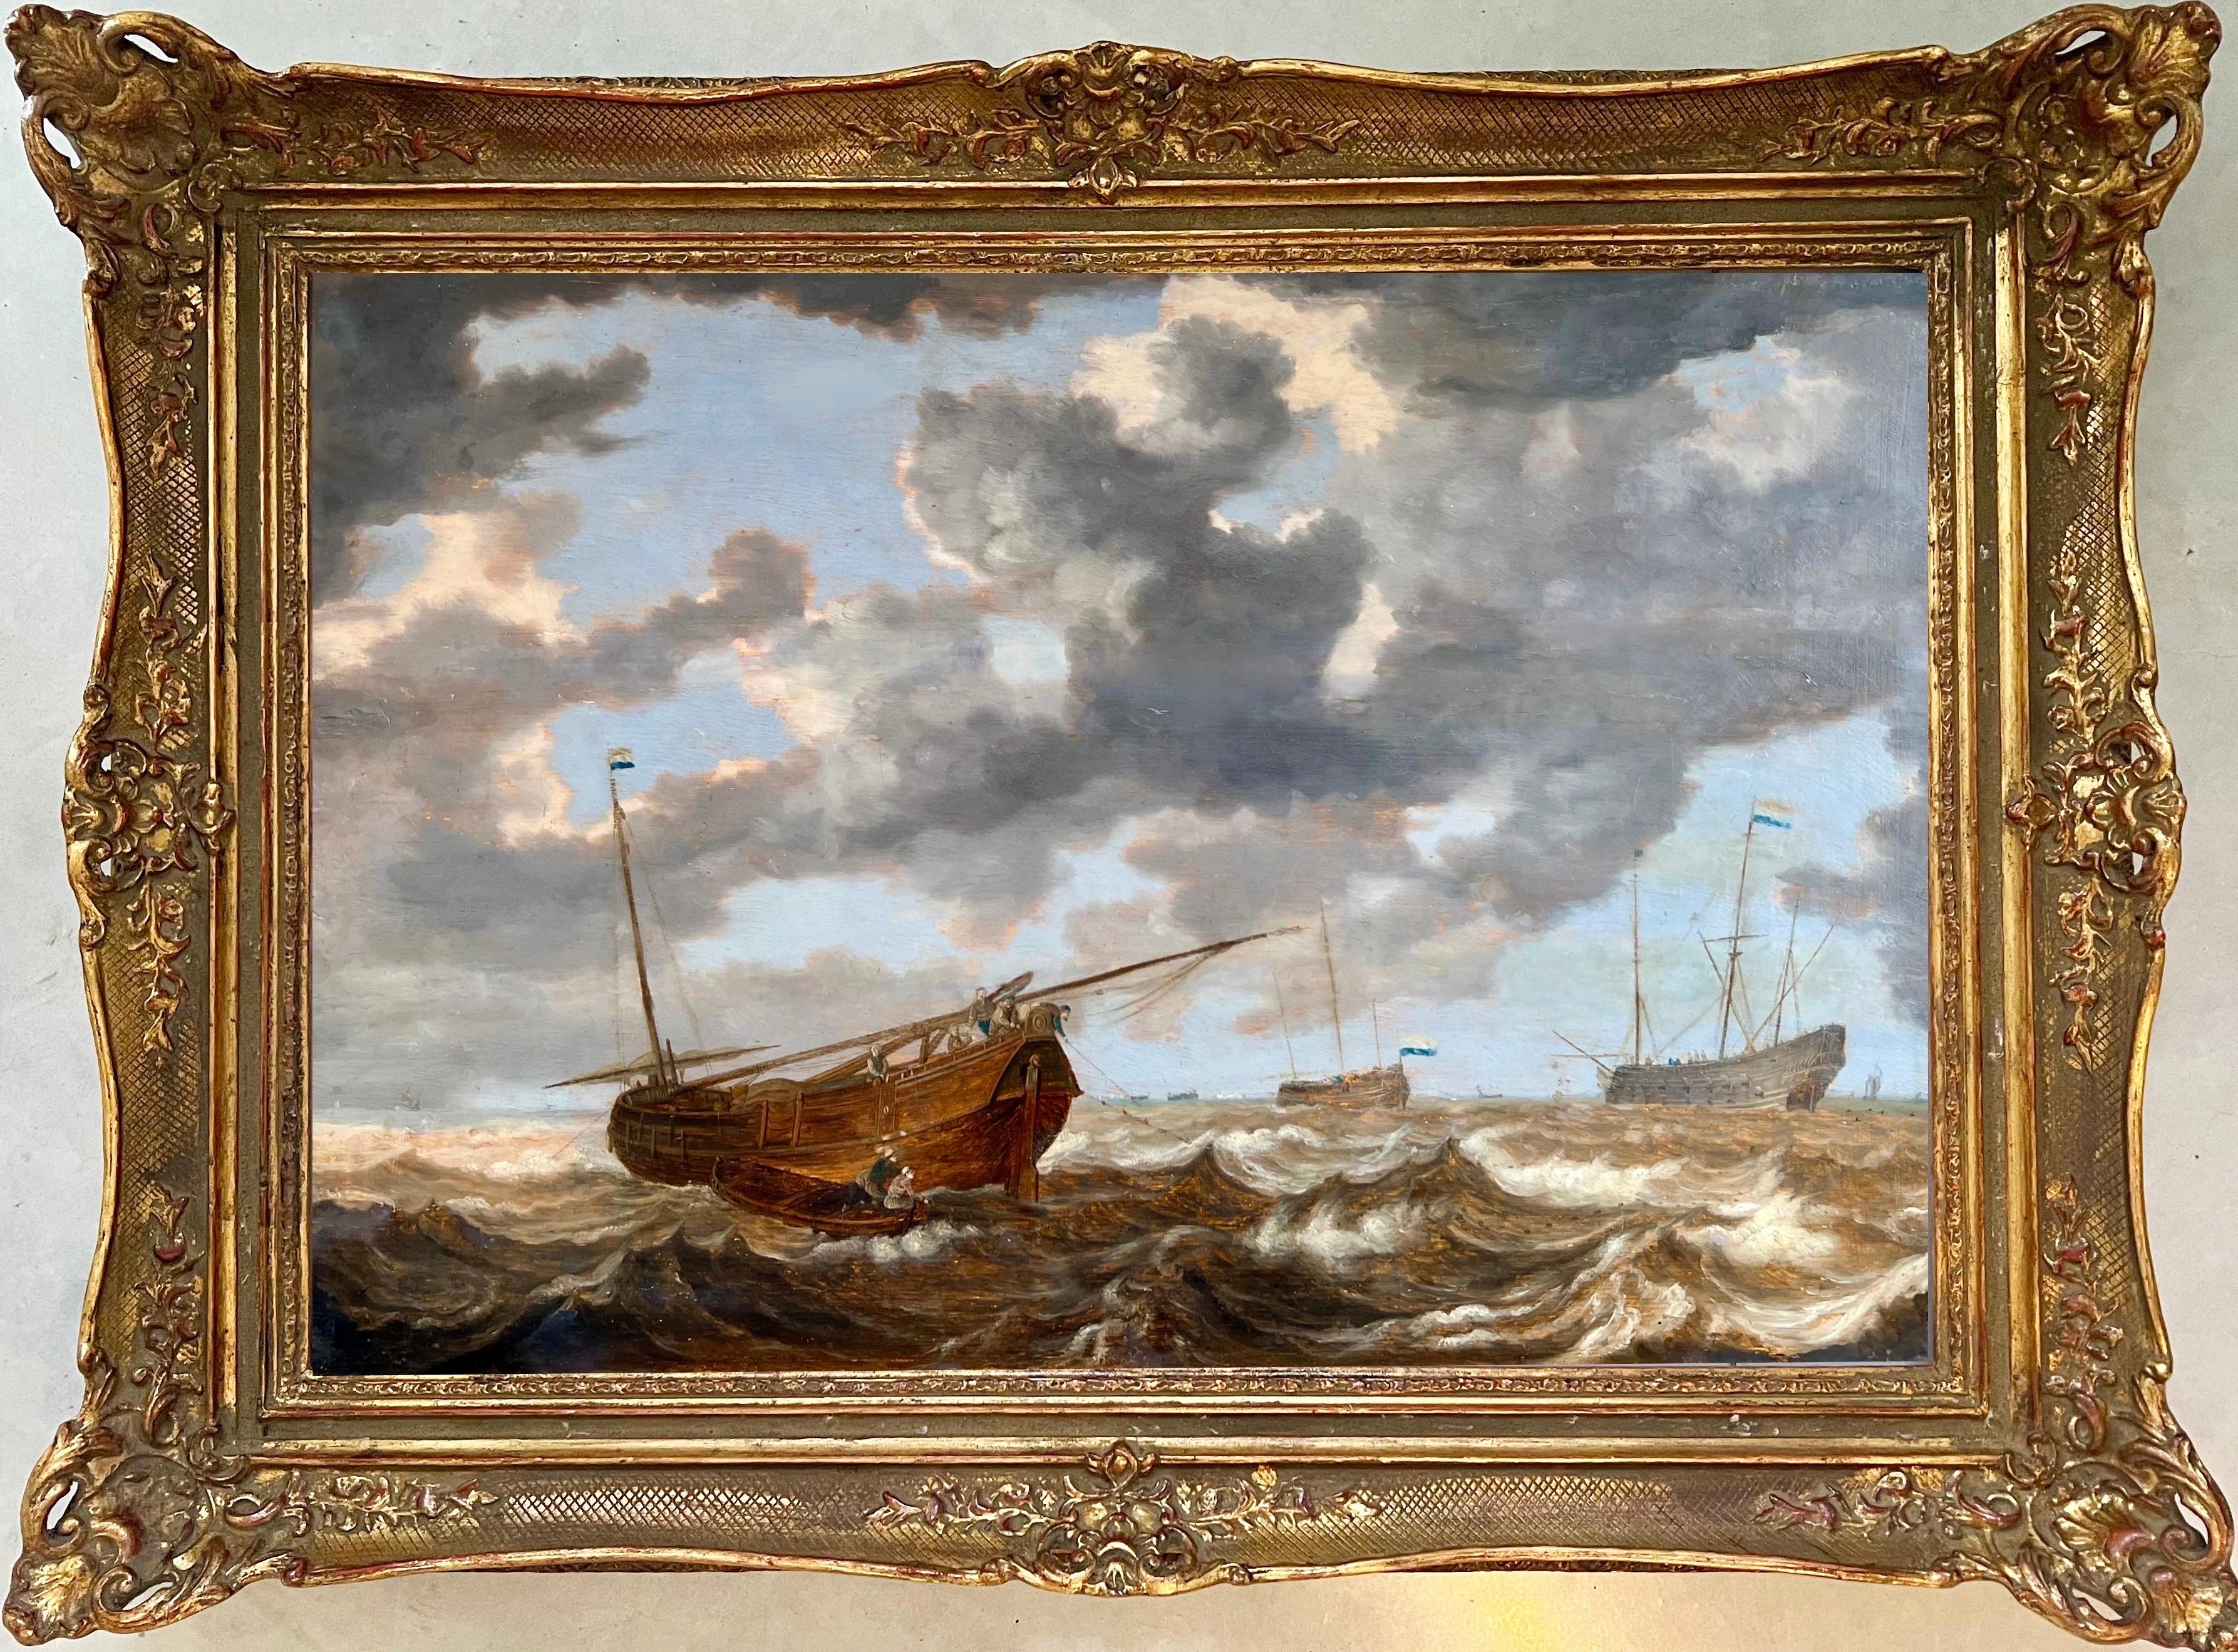 17th century Dutch seascape - Stormy sea with a Dutch Hoy - Marine Boats - Painting by Julius Porcellis